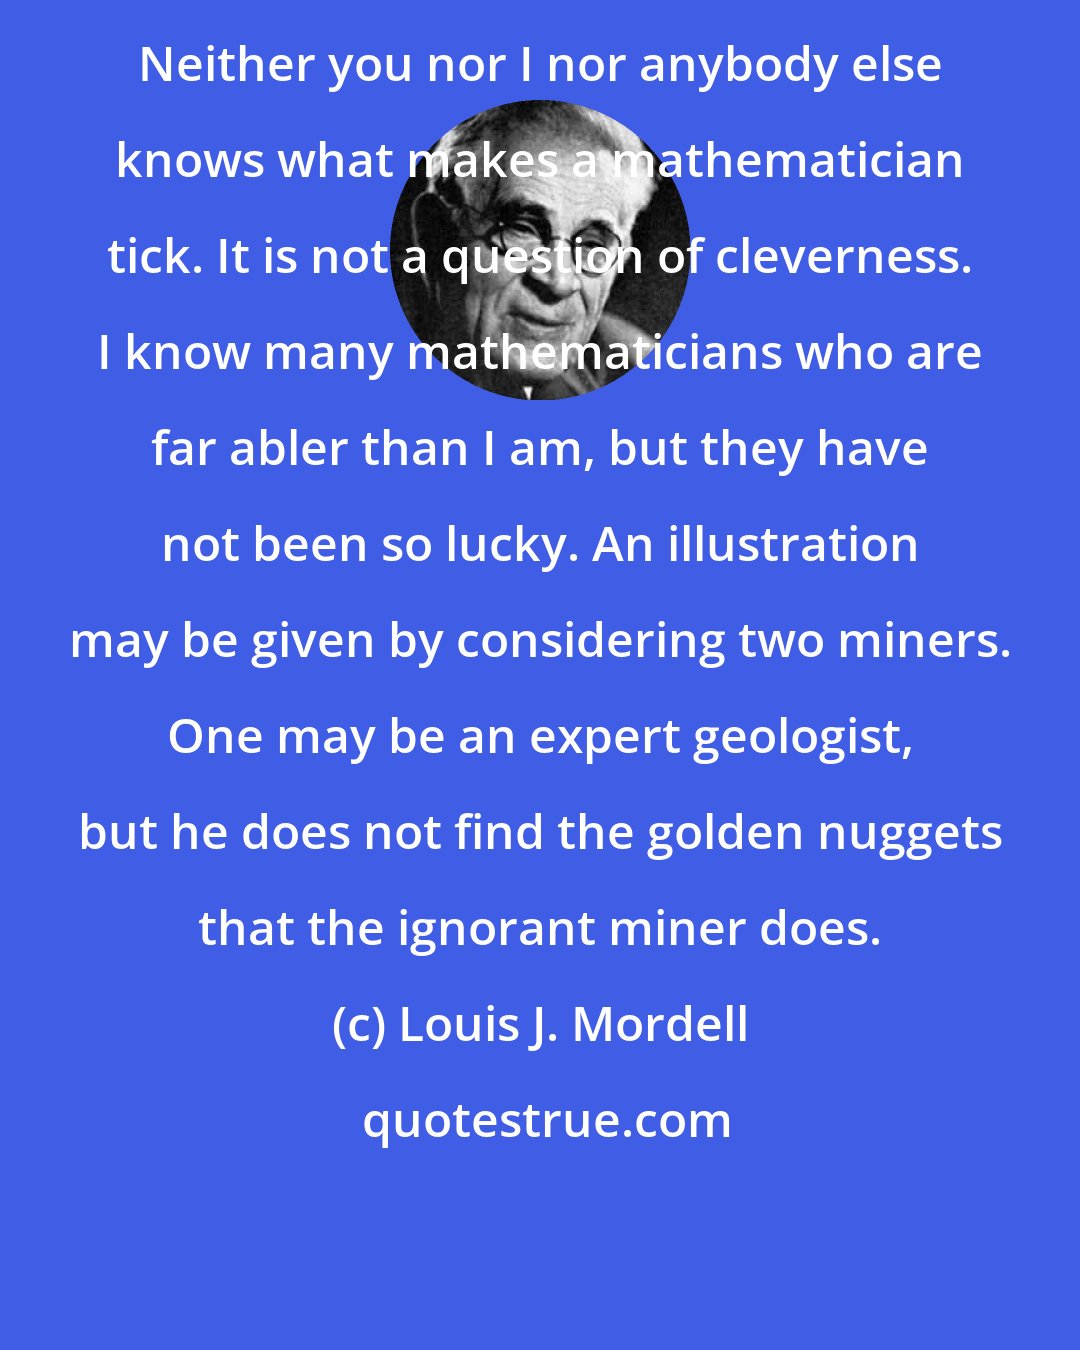 Louis J. Mordell: Neither you nor I nor anybody else knows what makes a mathematician tick. It is not a question of cleverness. I know many mathematicians who are far abler than I am, but they have not been so lucky. An illustration may be given by considering two miners. One may be an expert geologist, but he does not find the golden nuggets that the ignorant miner does.